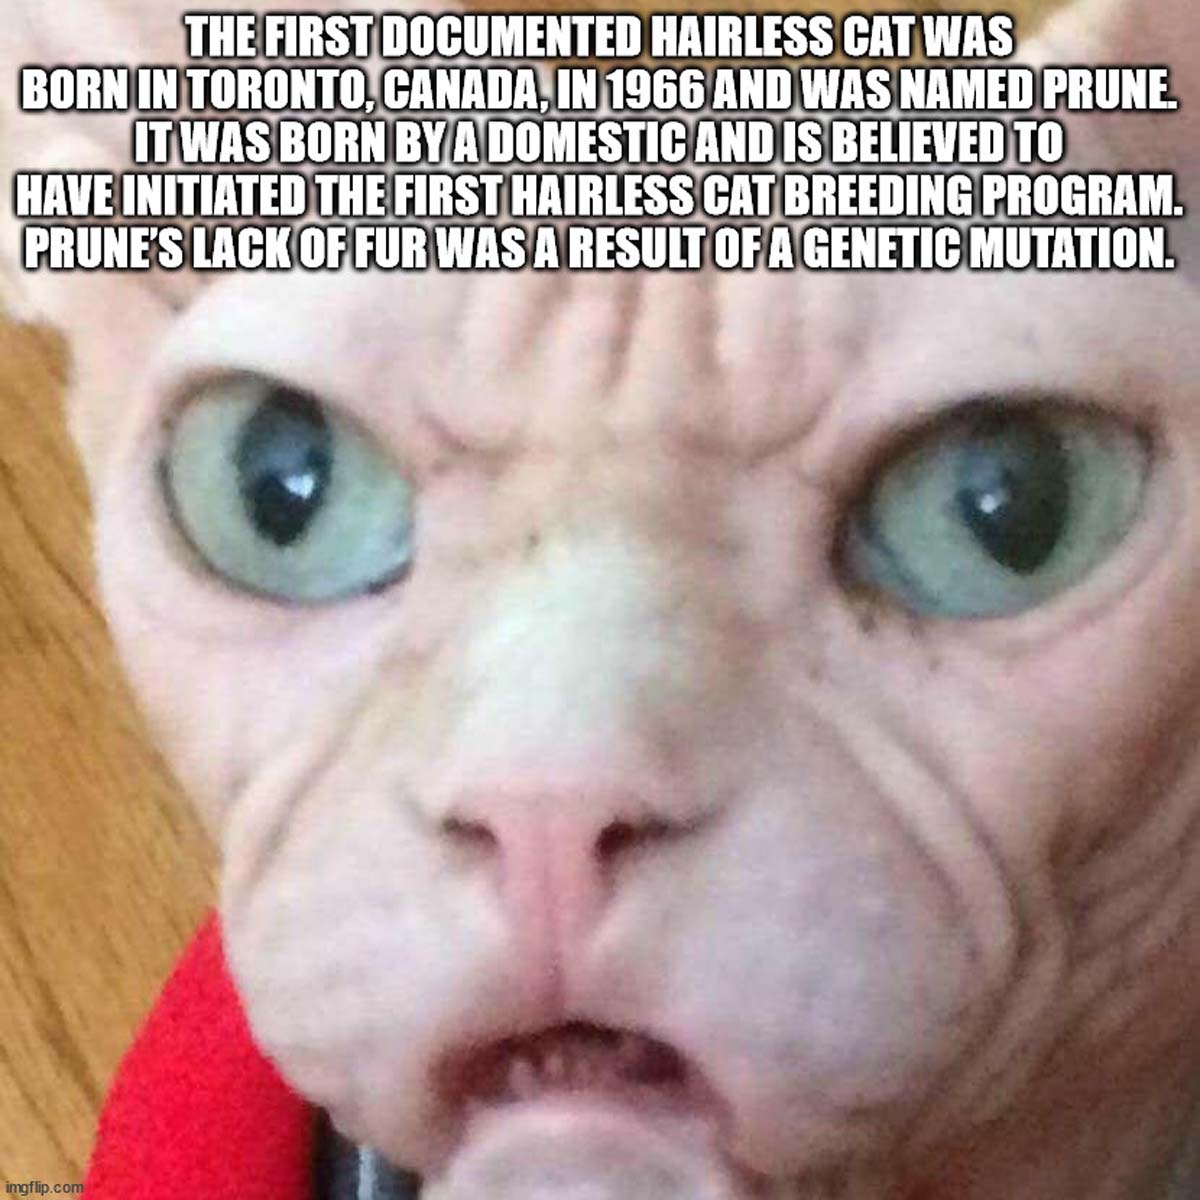 sphinx cat meme - The First Documented Hairless Cat Was Born In Toronto, Canada, In 1966 And Was Named Prune. It Was Born By A Domestic And Is Believed To Have Initiated The First Hairless Cat Breeding Program. Prune'S Lack Of Fur Was A Result Of A Geneti